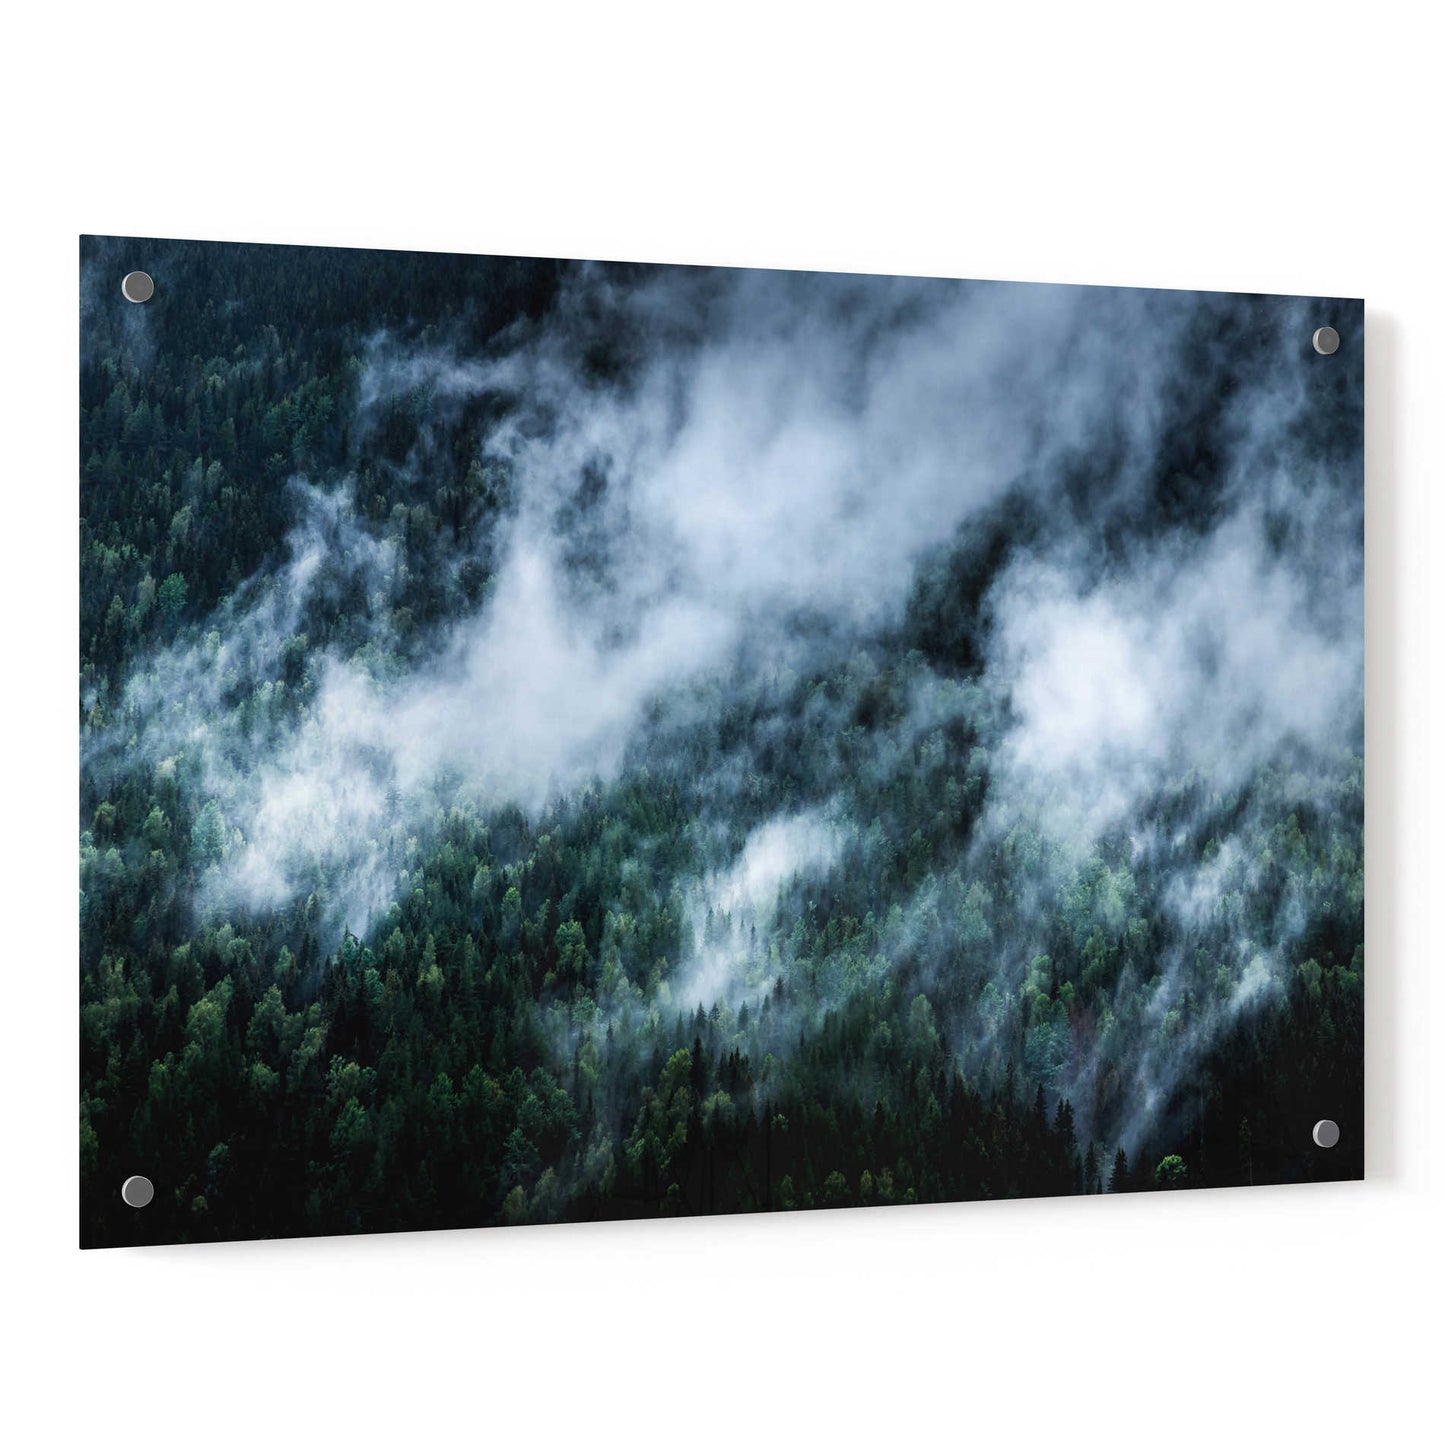 Epic Art 'Foggy Mornings In The Mountains' by Nicklas Gustafsson Acrylic Glass Wall Art,36x24